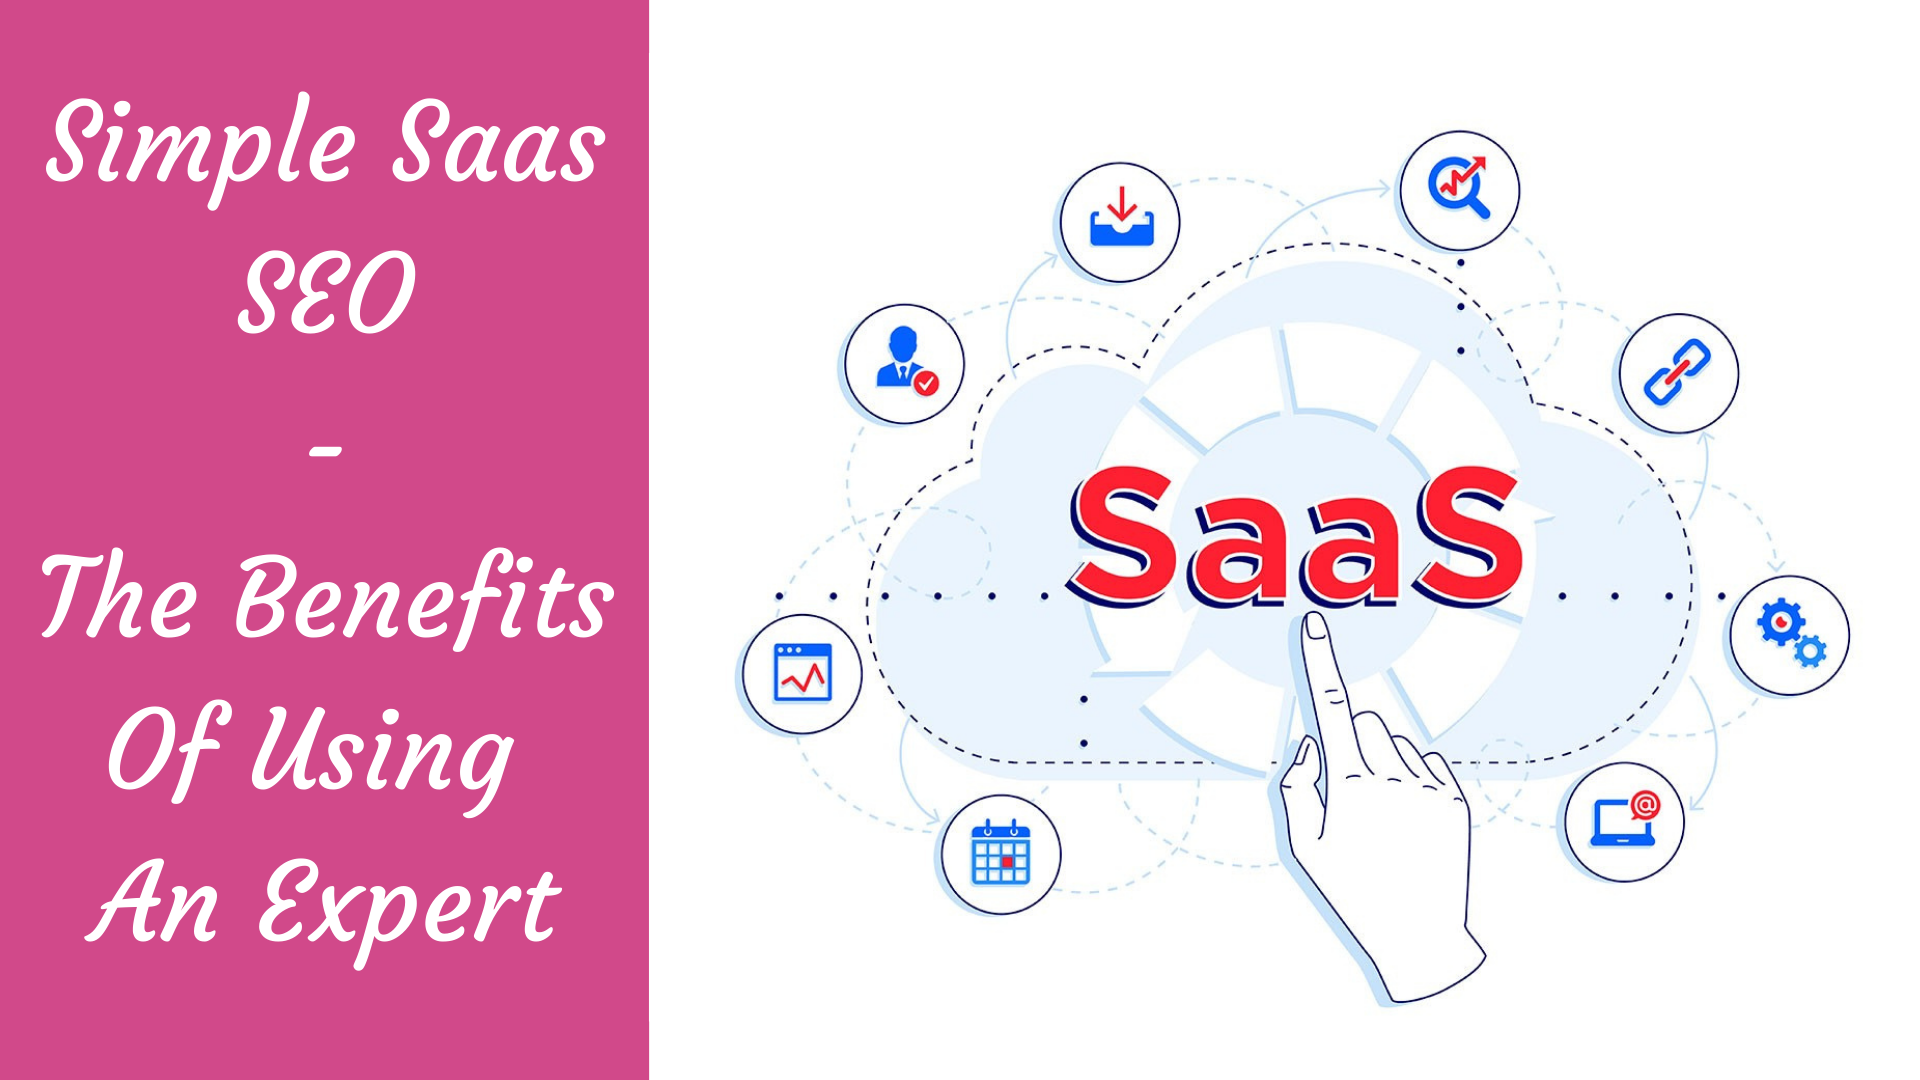 You are currently viewing Simple Saas SEO: The Benefits Of Using An Expert